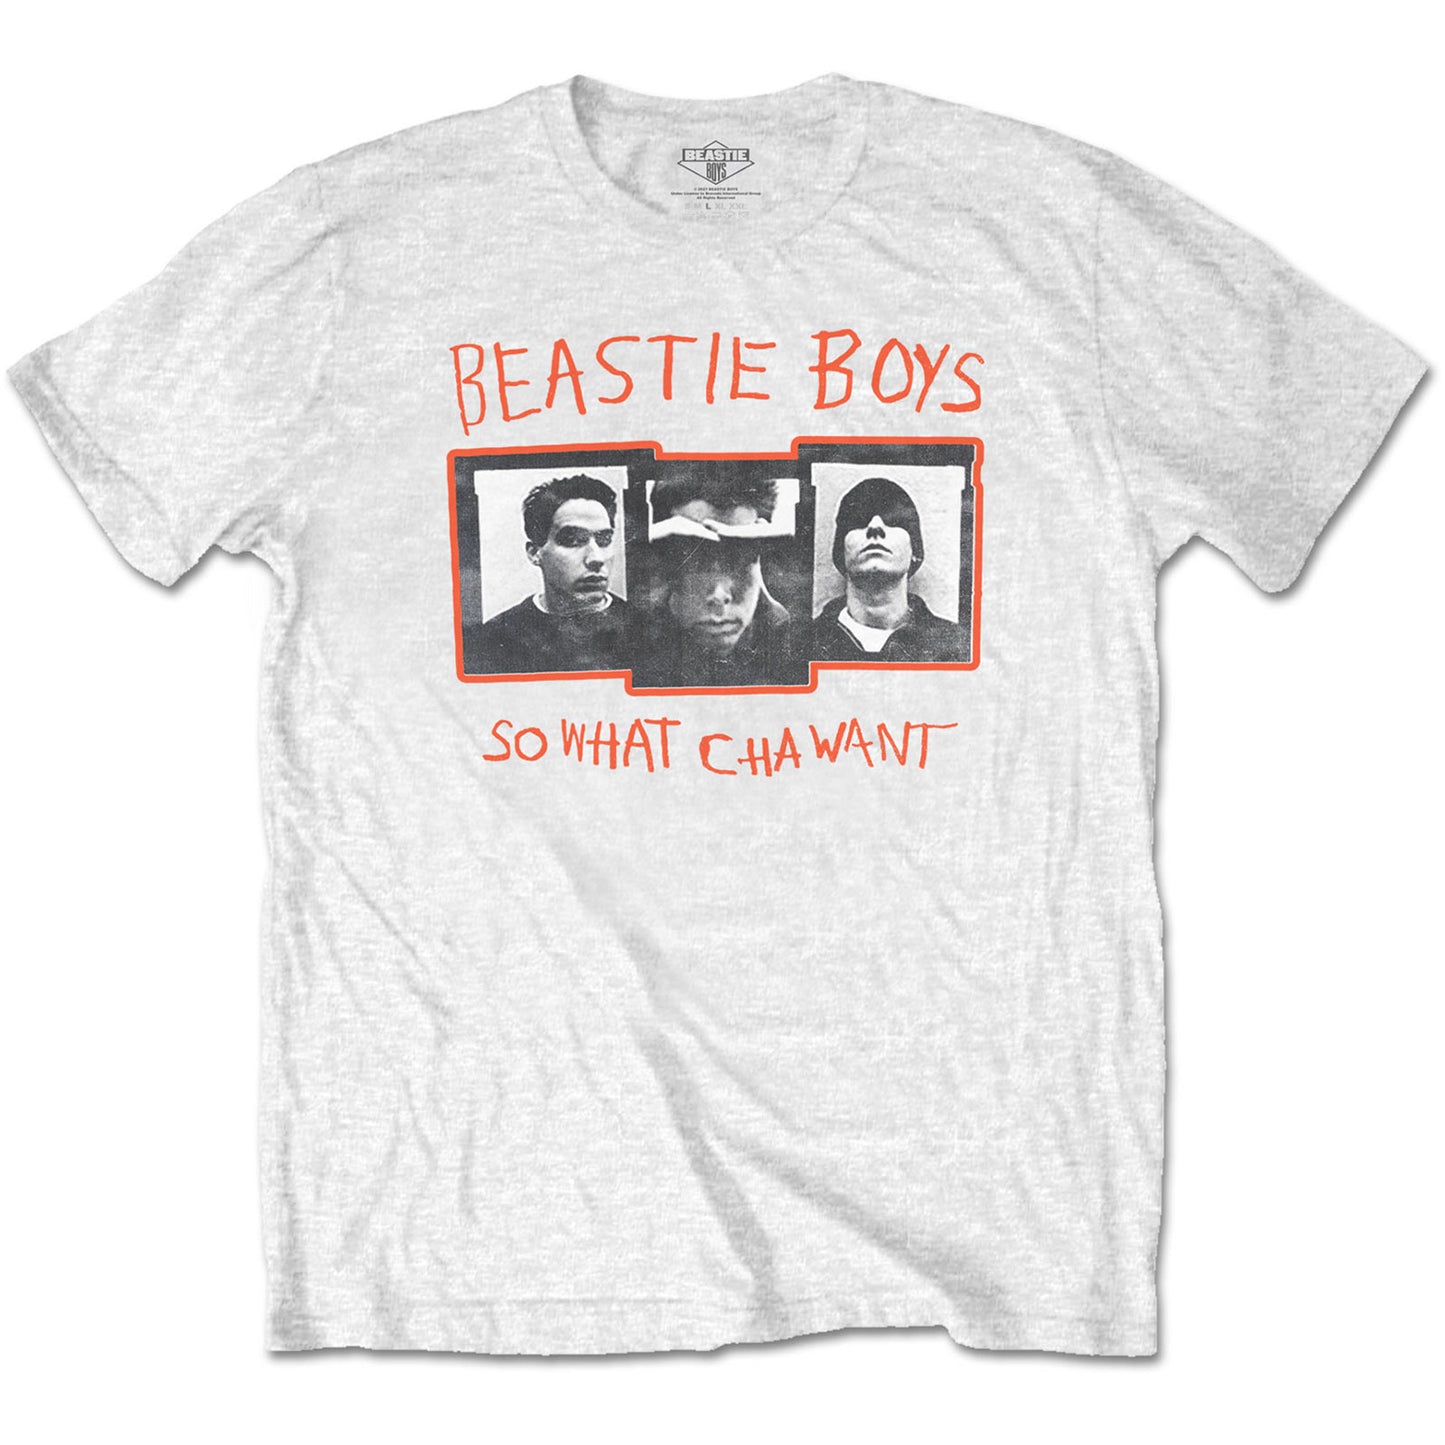 The Beastie Boys T-Shirt: So What Cha Want